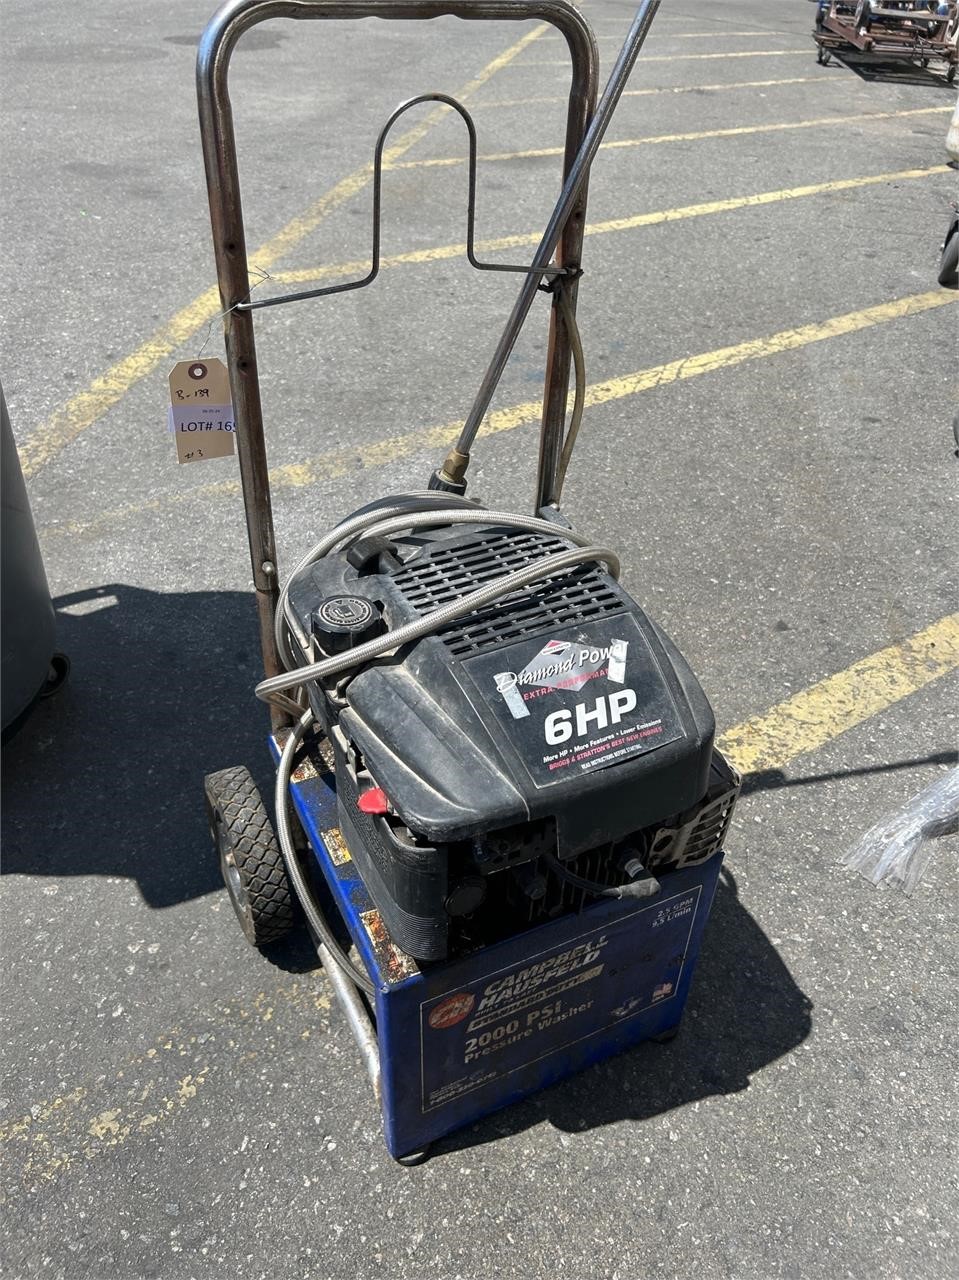 Diamond Power 6 HP Pressure Washer As - Is